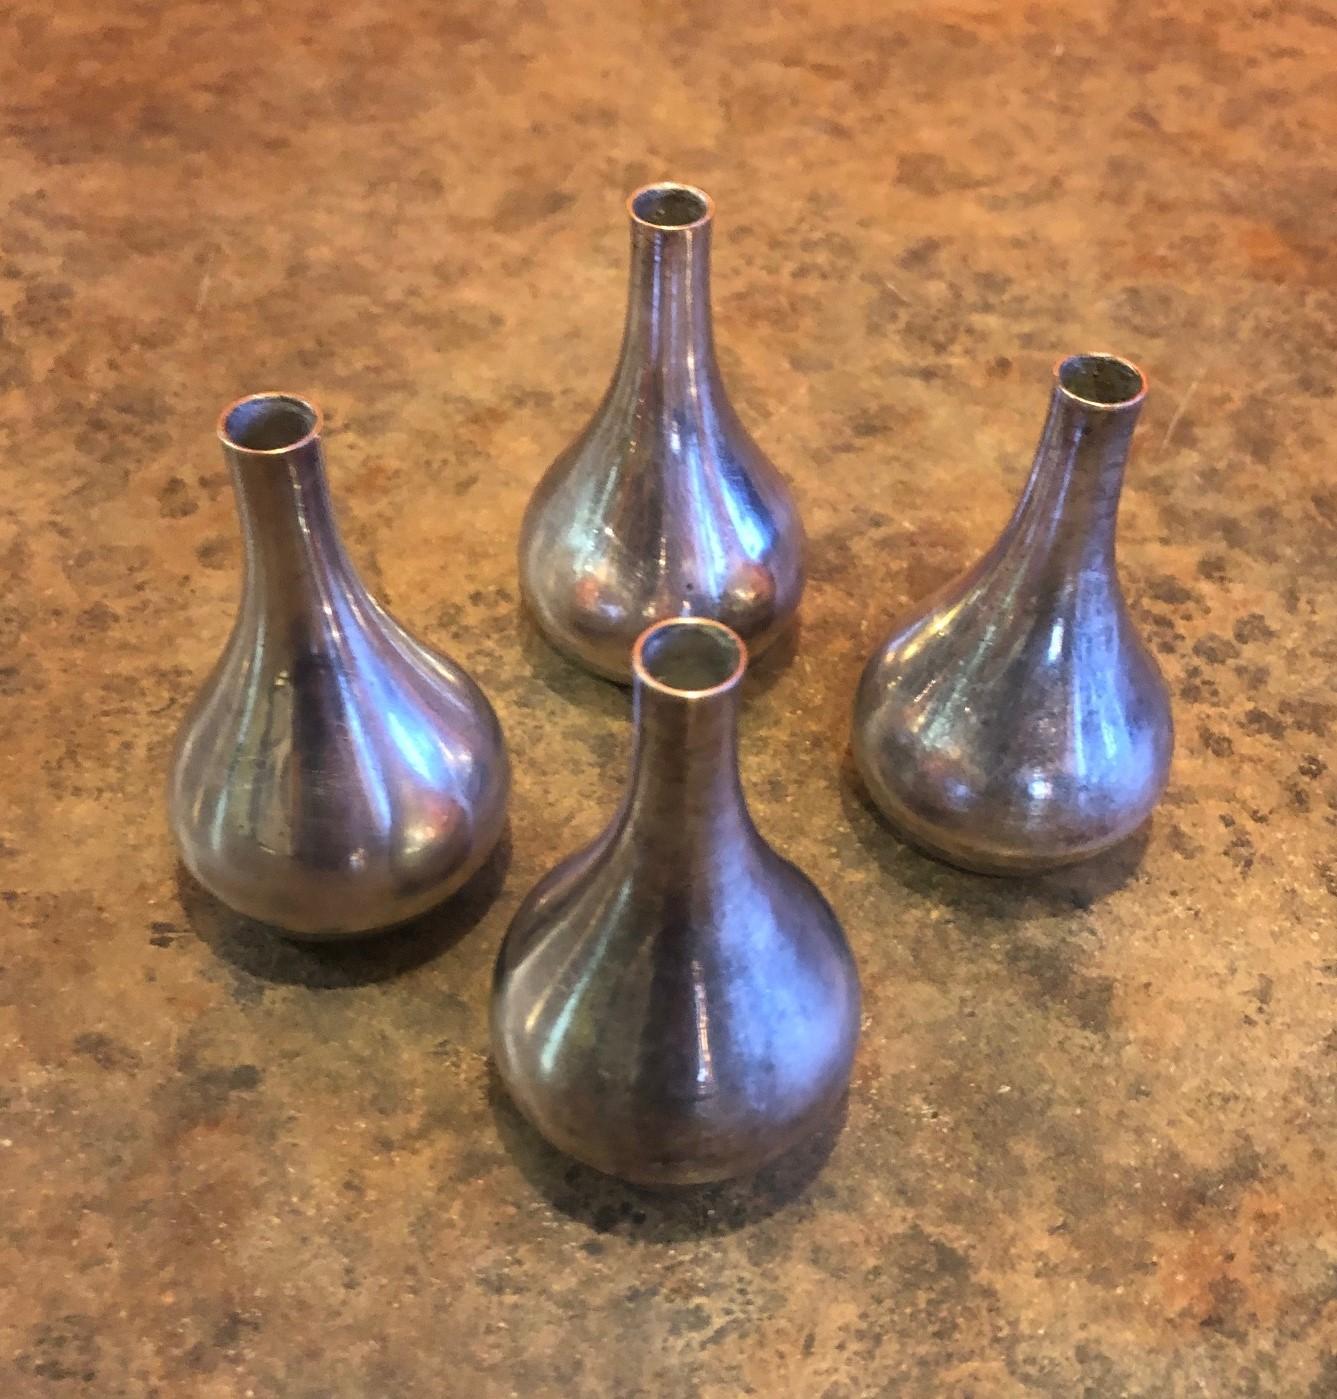 Set of four tear drop candleholders by Jens Quistgaard for Dansk, circa 1960s. They are made in France of silver plate over metal and support a .25